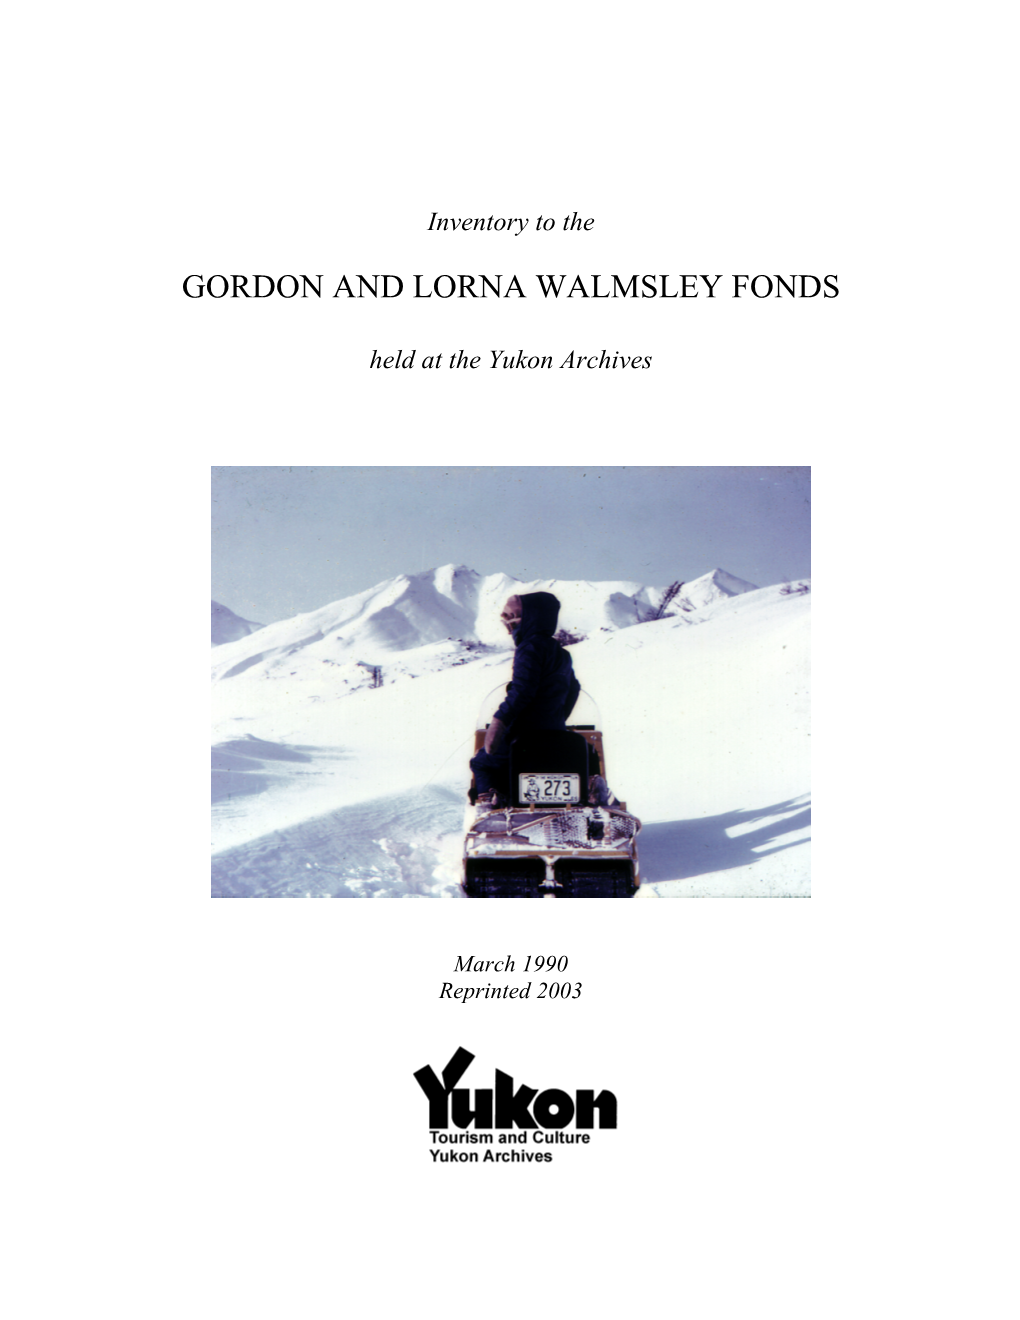 Inventory to the Gordon and Lorna Walmsley Fonds Held at the Yukon Archives”